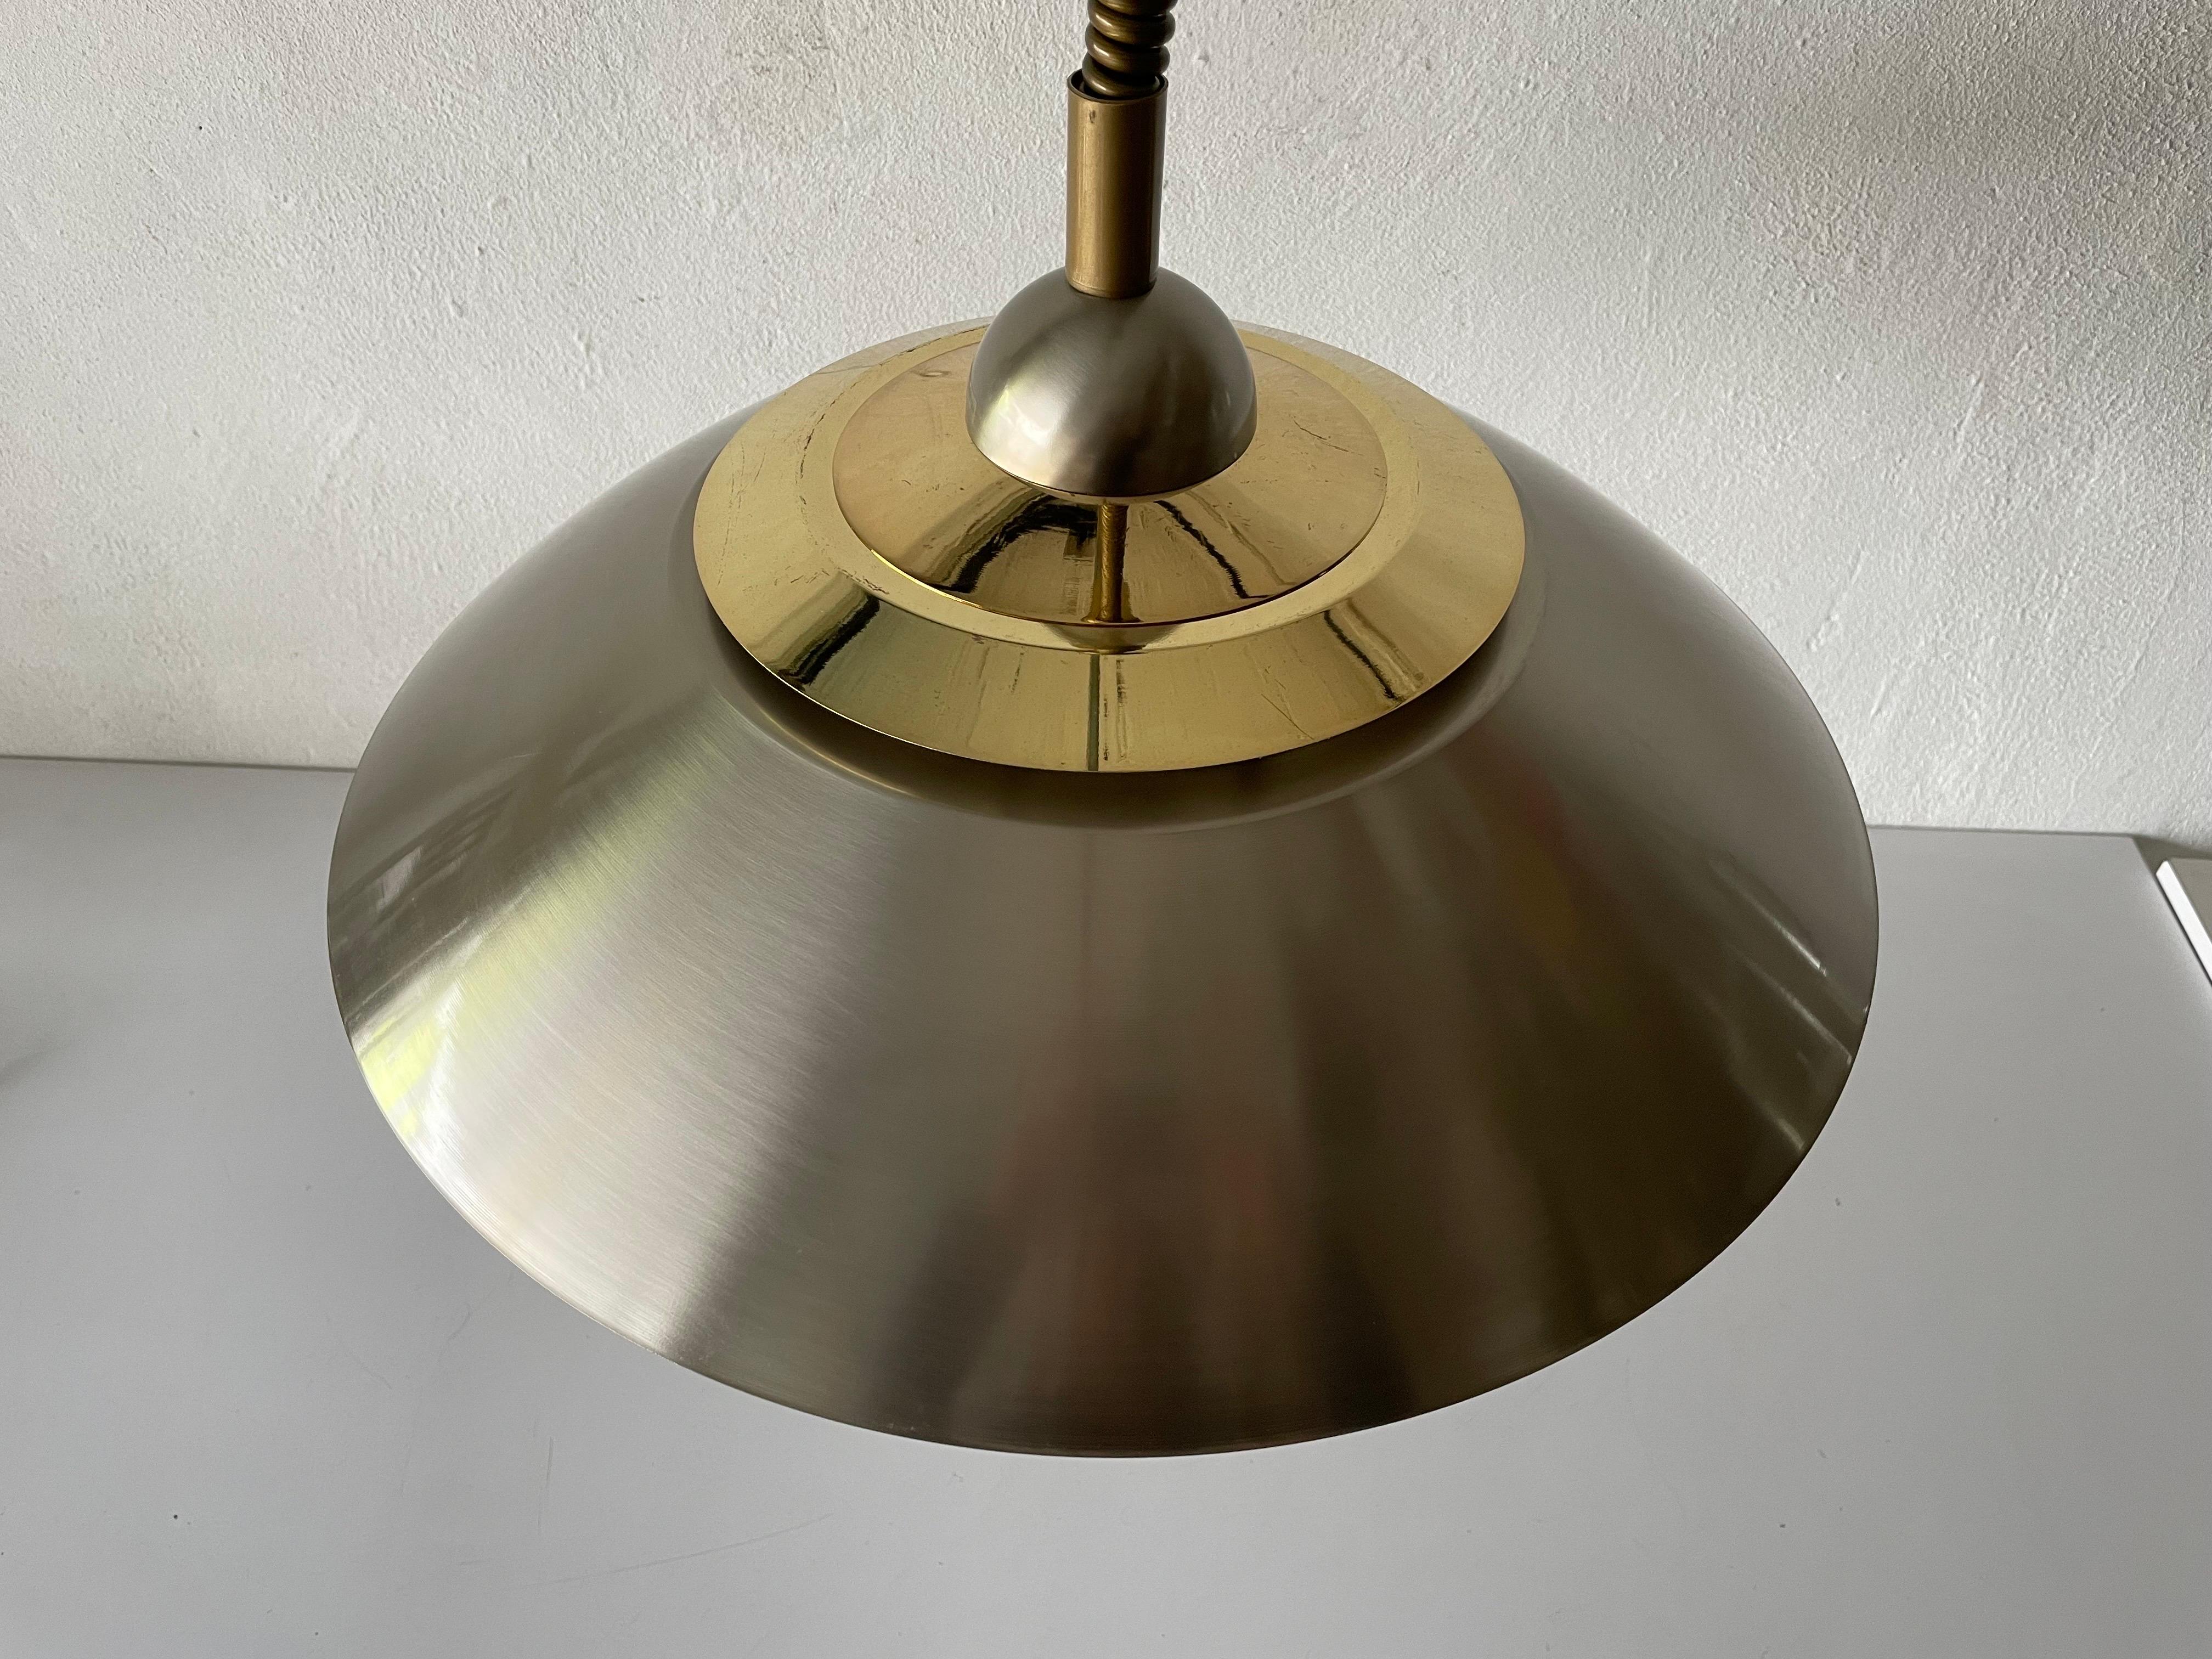 Chrome and Gold Metal pendant lamp by TZ, 1970s, Germany

Lampshade is in good condition and very clean. 
This lamp works with E27 light bulb. 
Wired and suitable to use with 220V and 110V for all countries.

Measures: 

Shade diameter and